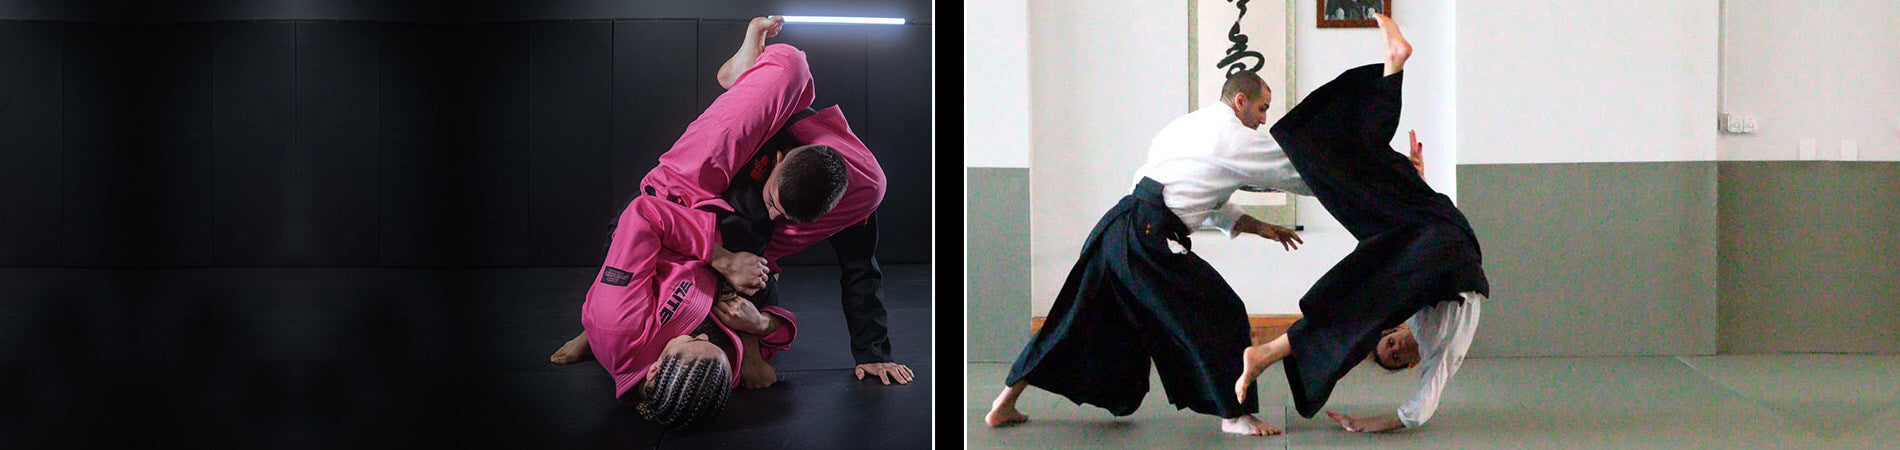 BJJ vs Aikido – Differences and Similarities